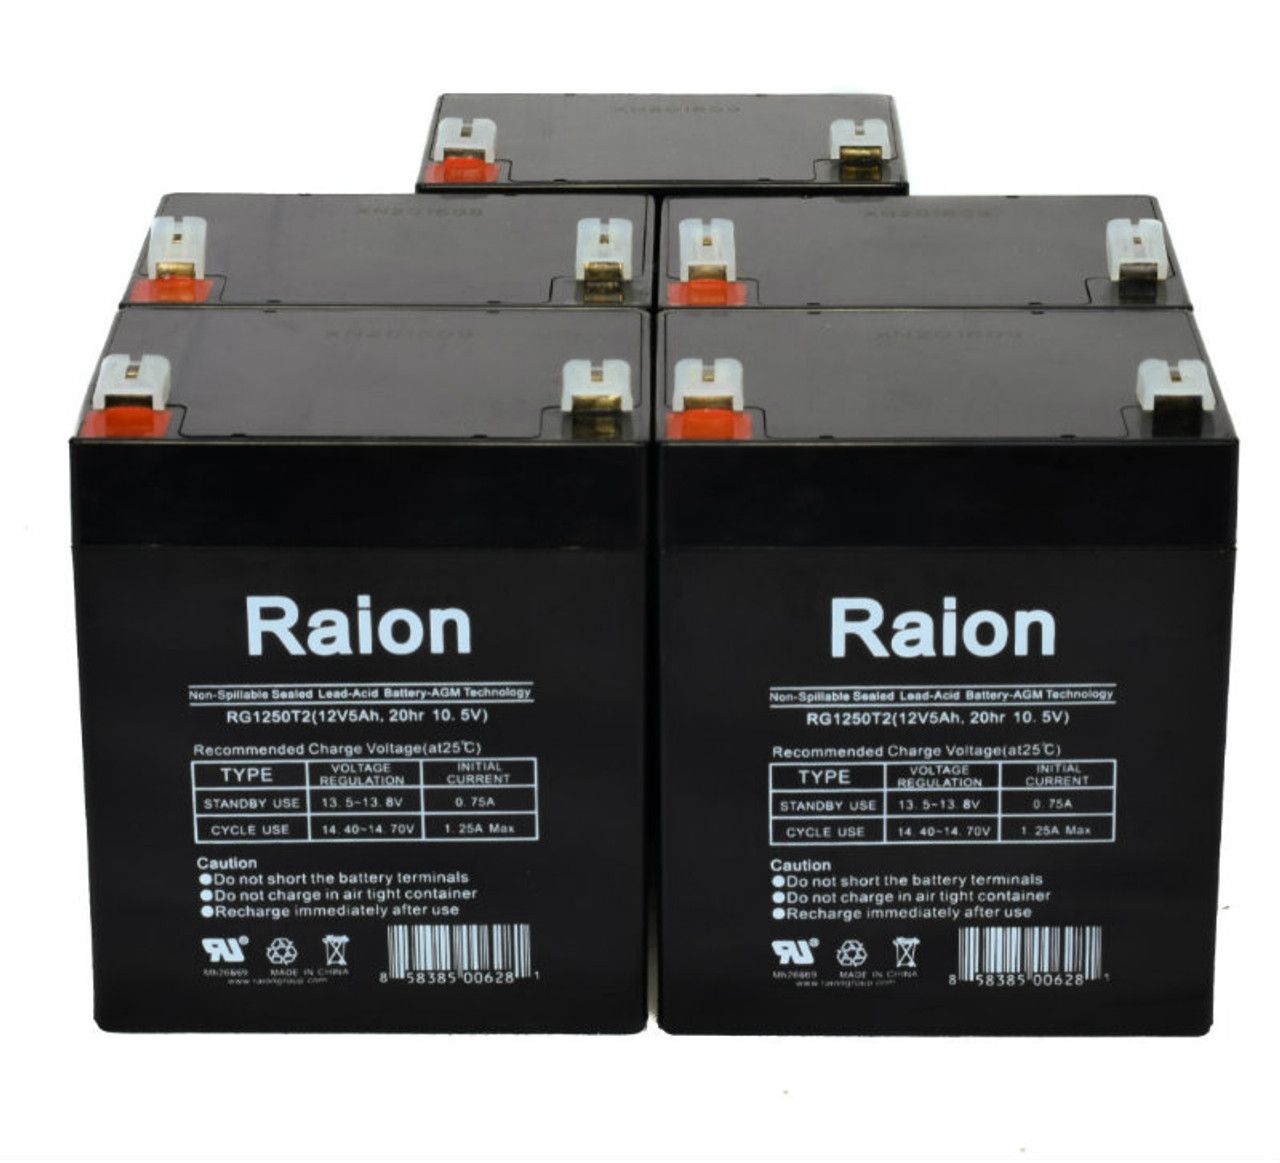 Raion Power RG1250T1 Replacement Fire Alarm Control Panel Battery for Alarm Lock RBAT4 - 5 Pack